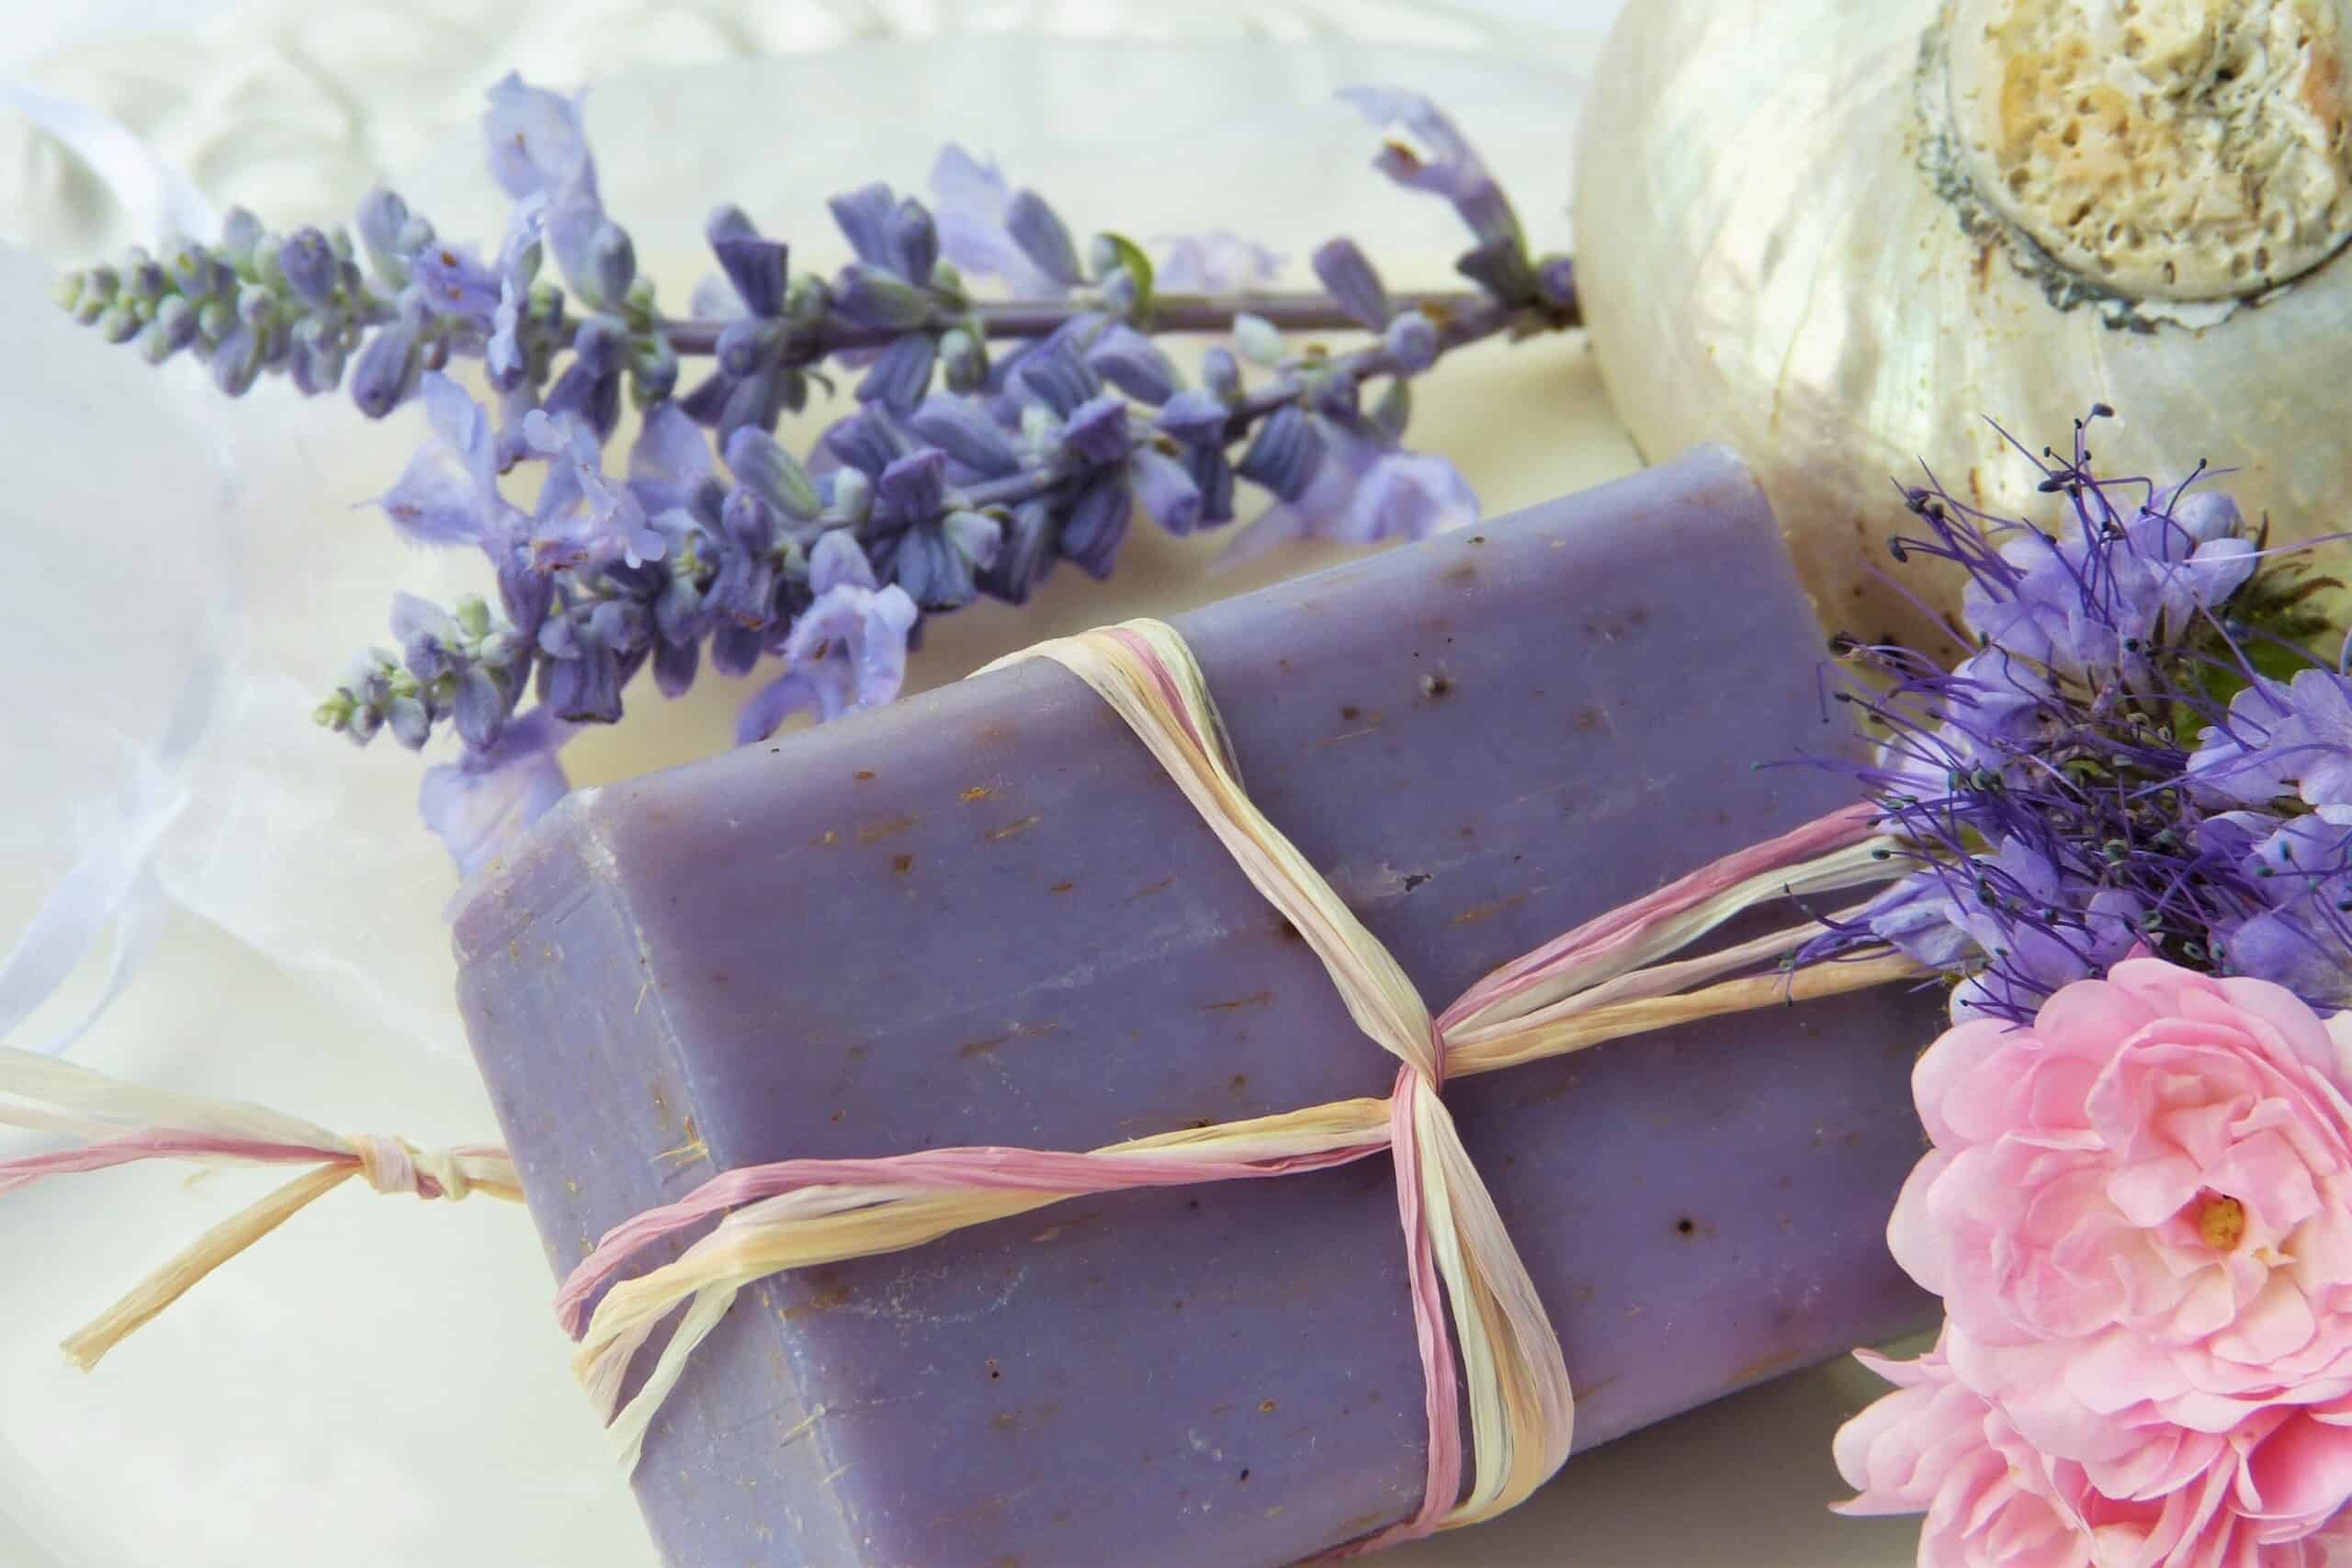 Hand-made soap - individual and valued